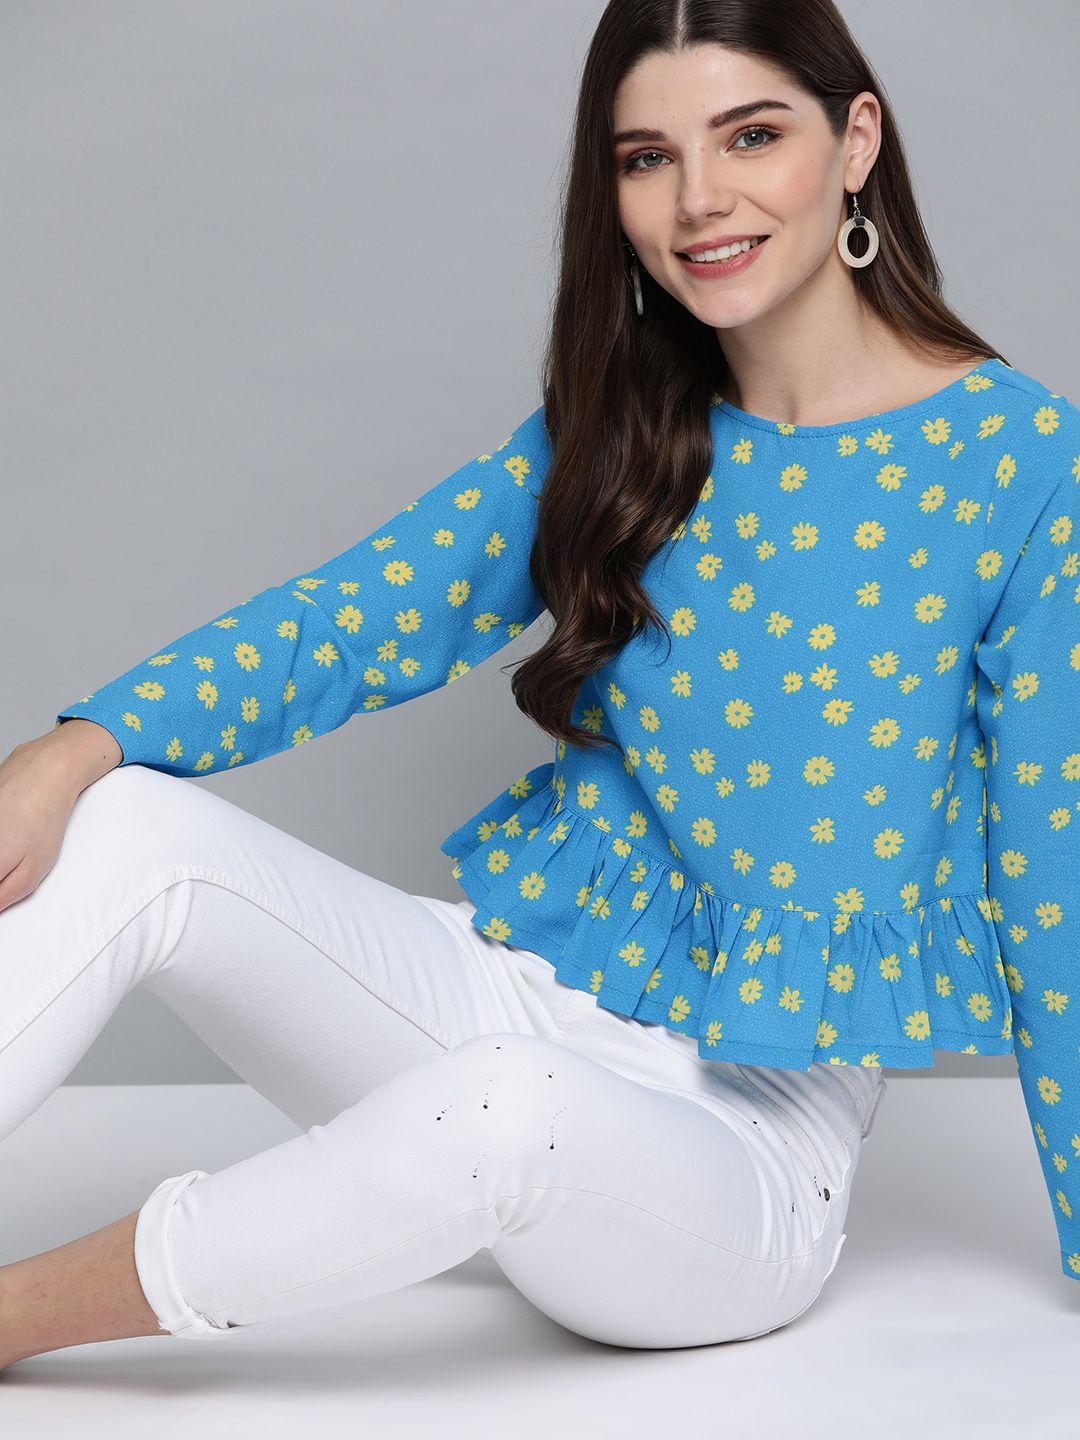 mast & harbour blue & yellow floral printed peplum top